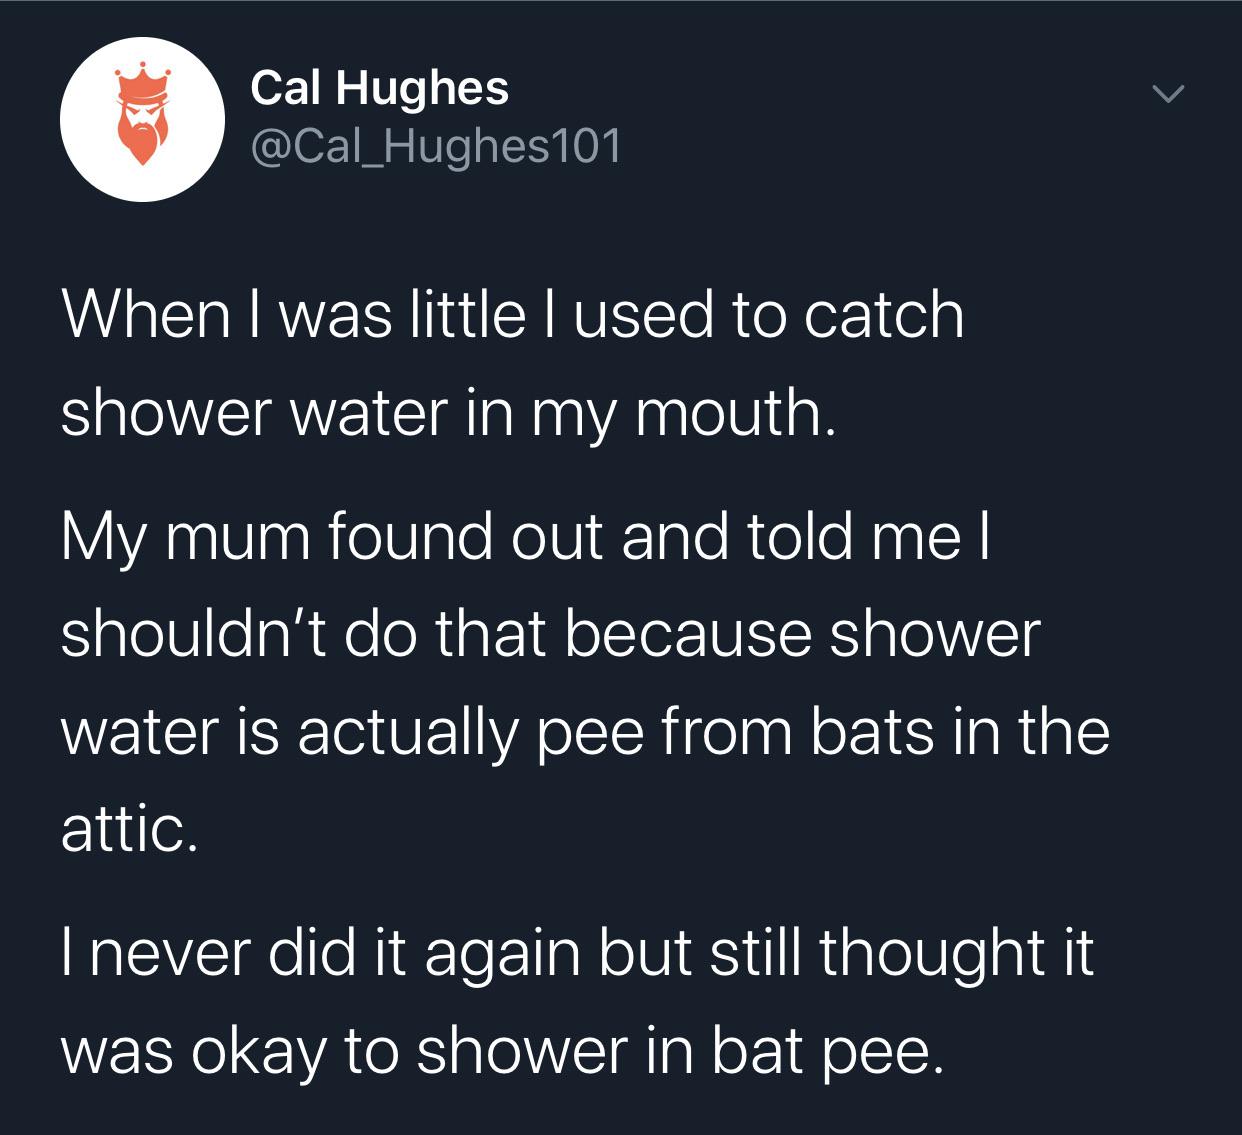 atmosphere - Cal Hughes When I was little lused to catch shower water in my mouth. My mum found out and told me | shouldn't do that because shower water is actually pee from bats in the attic. Inever did it again but still thought it was okay to shower in